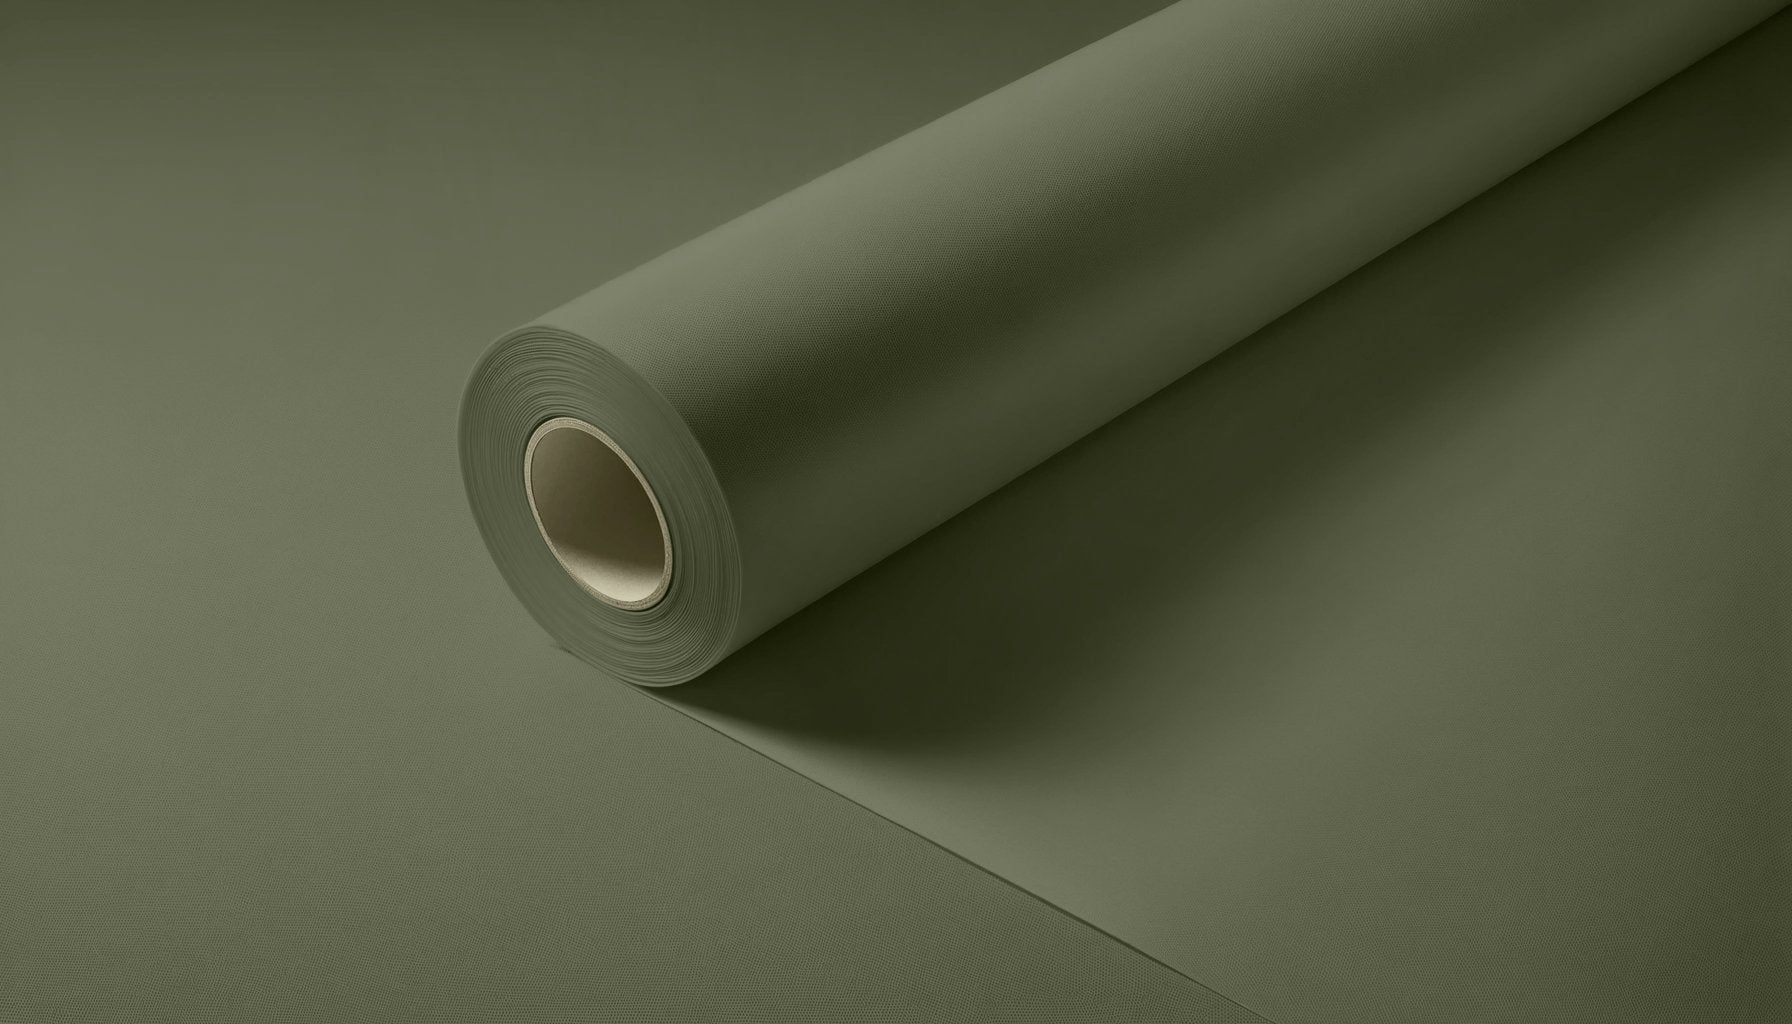 Peel & Stick Removable Re-usable Paint - Color RAL 6003 Olive Green - offRAL™ - RALRAW LLC, USA